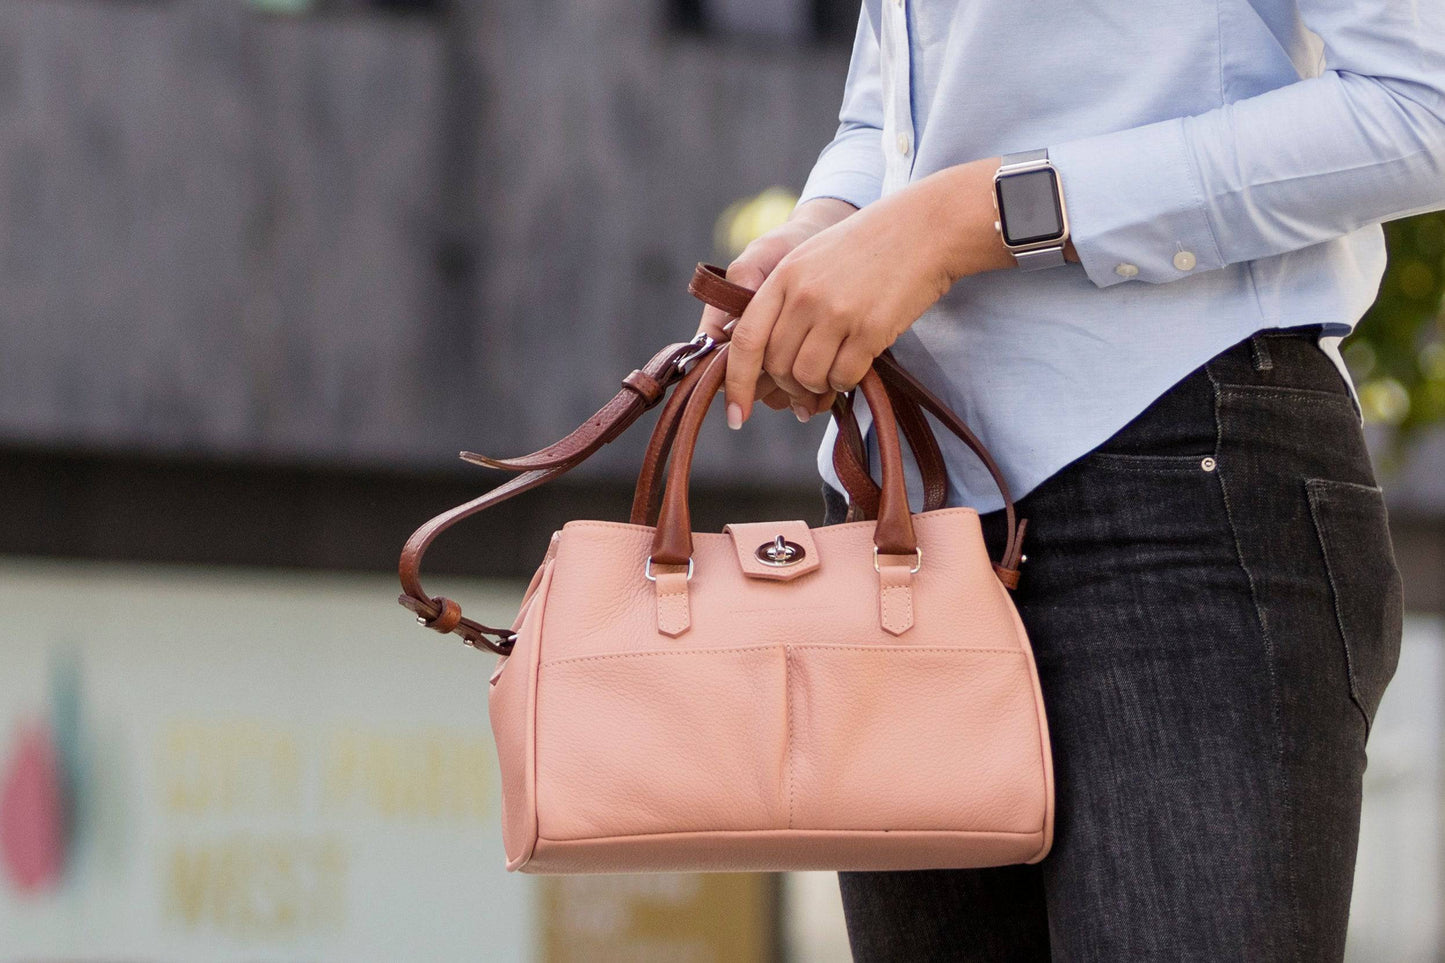 Cadogan Mini Tote Bag in Rose Leather by Woodcock & Cavendish for sale - Woodcock and Cavendish